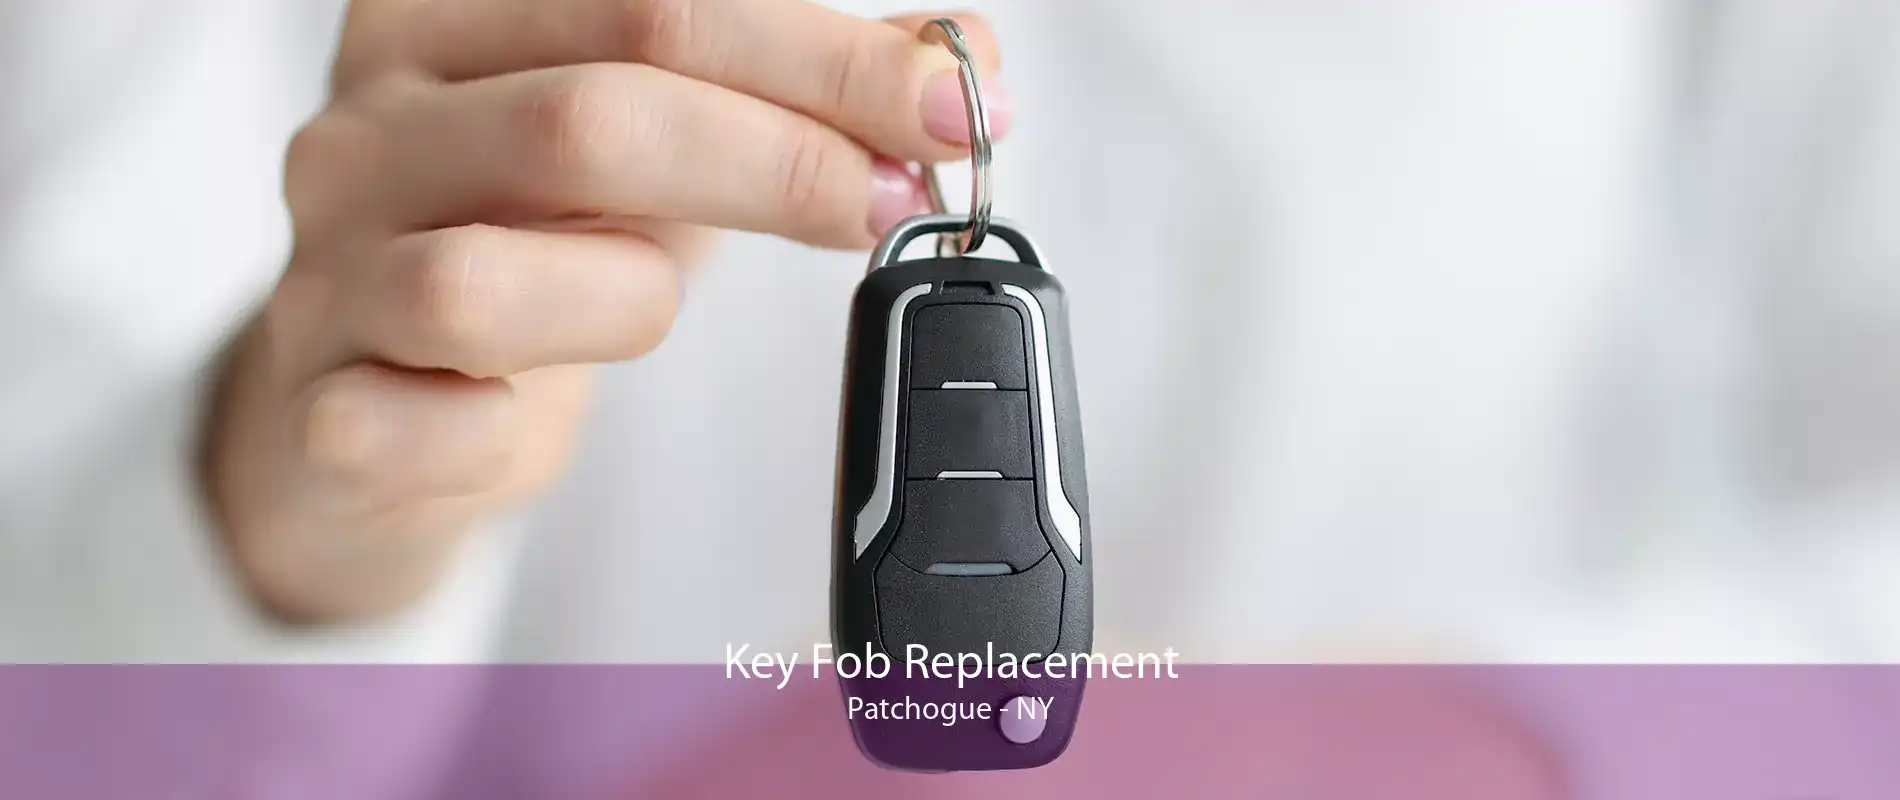 Key Fob Replacement Patchogue - NY